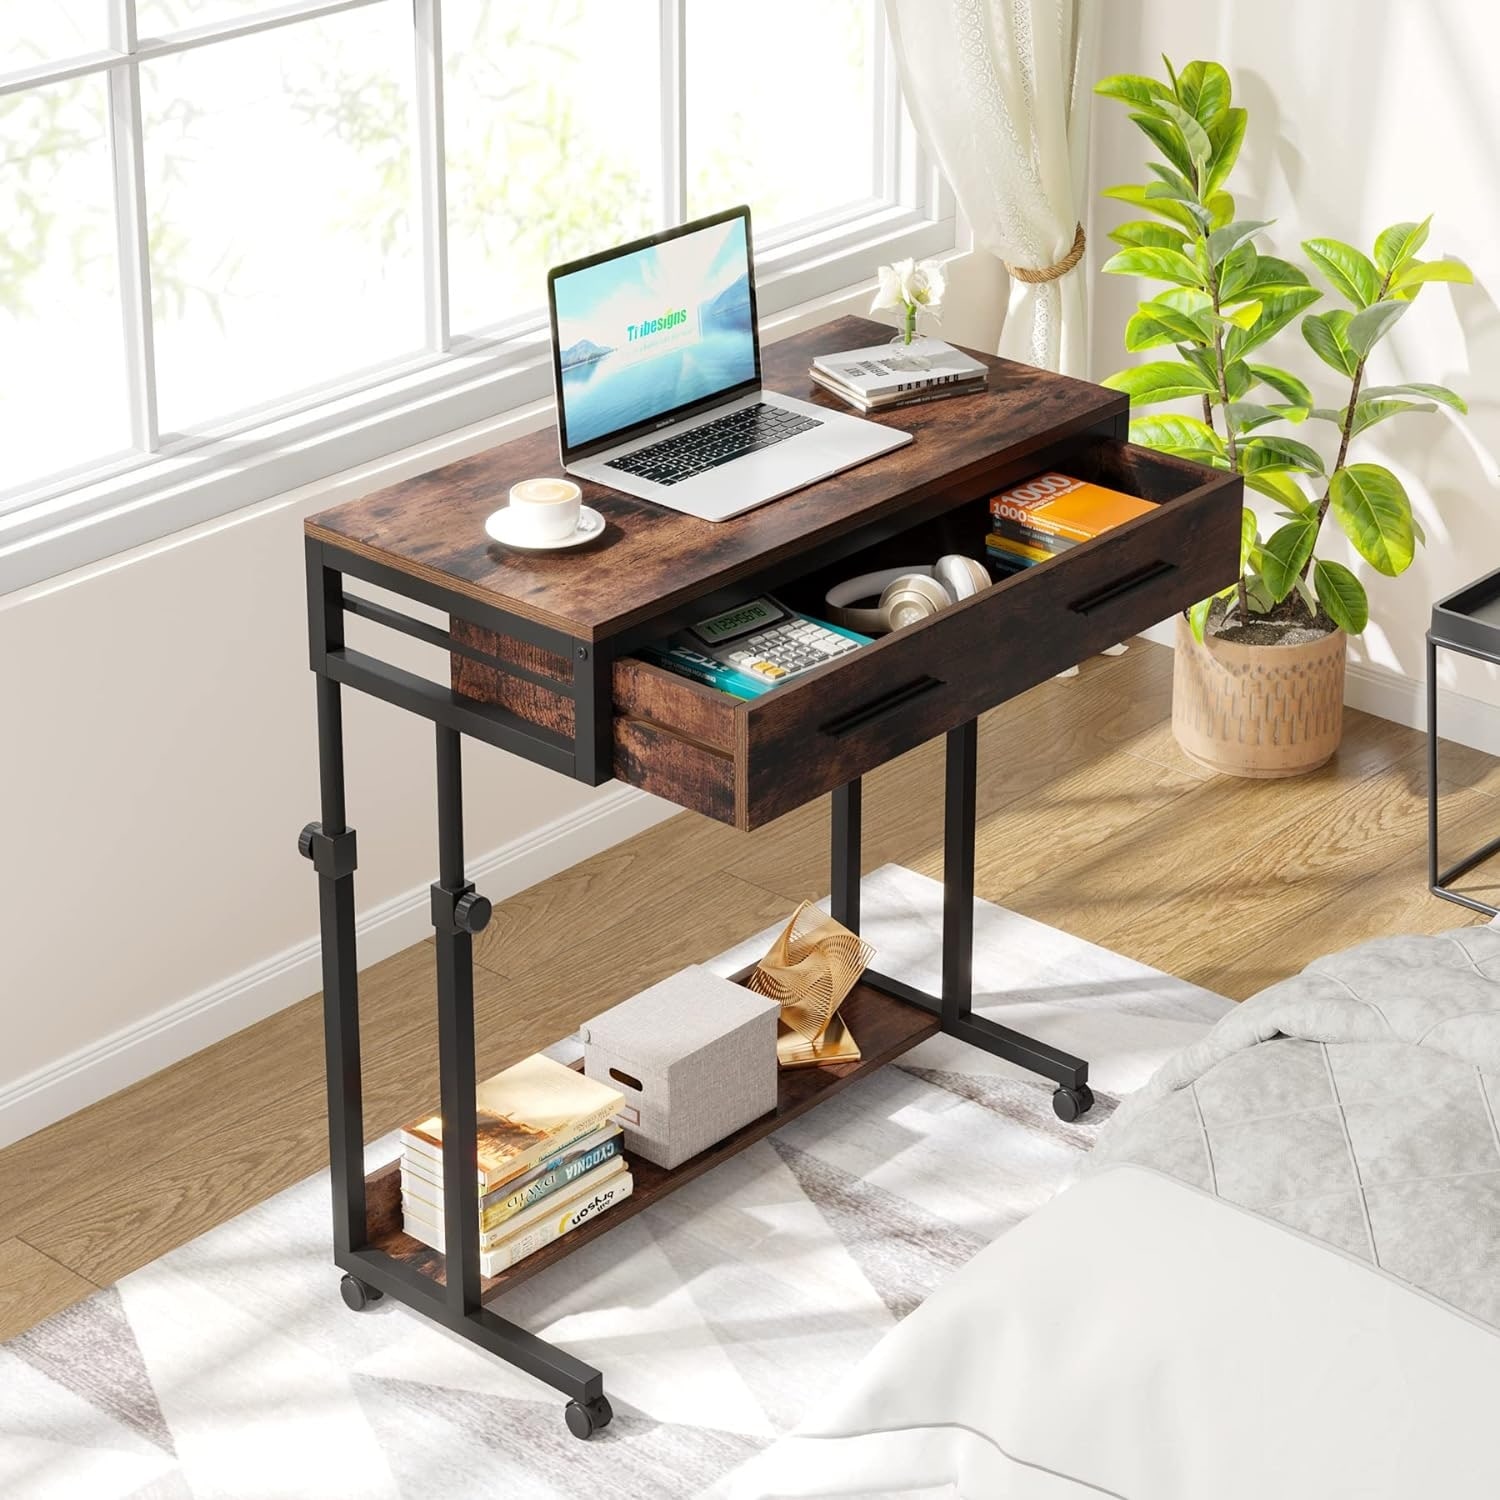 https://ak1.ostkcdn.com/images/products/is/images/direct/399759565fa8fa85fd89b06b7c447998c18ce9f2/Adjustable-C-Table-Portable-Desk-with-Drawers-and-Wheels%2C-Mobile-Couch-Desk.jpg